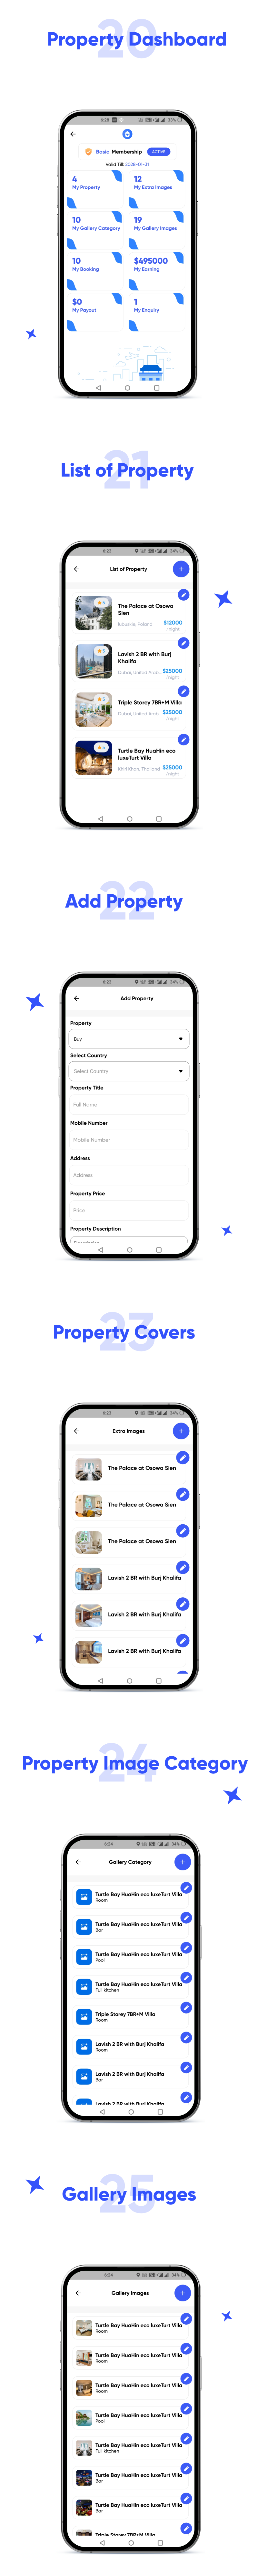 GoProperty - Real Estate Property Listing App | Rentals-Exchange-Buy | Airbnb Clone | Full Solution - 5